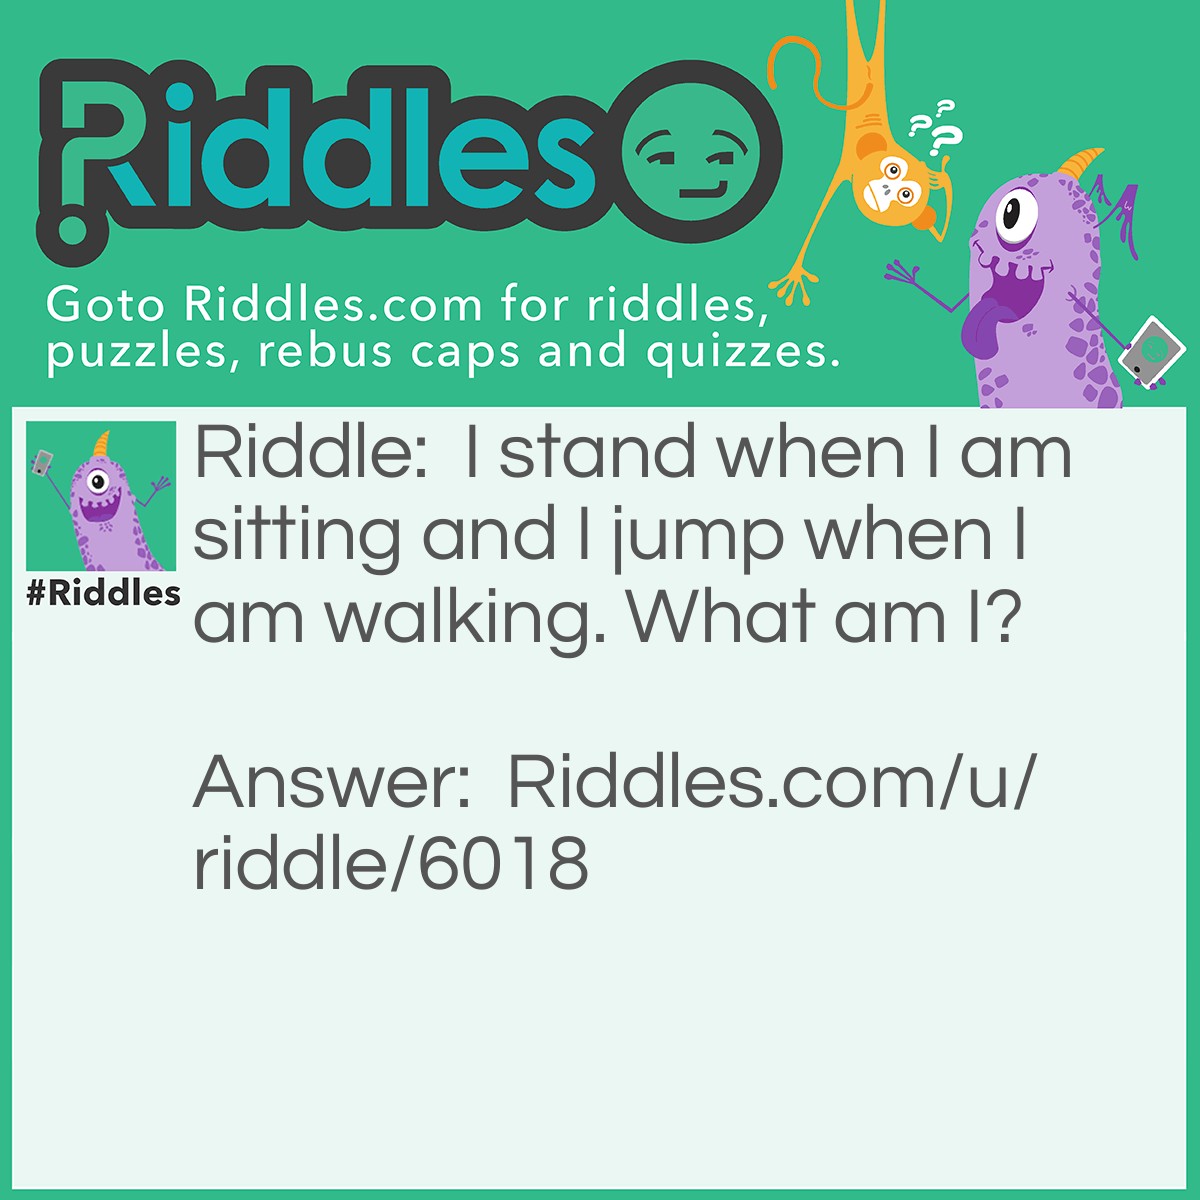 Riddle: I stand when I am sitting and I jump when I am walking. What am I? Answer: A kangaroo.